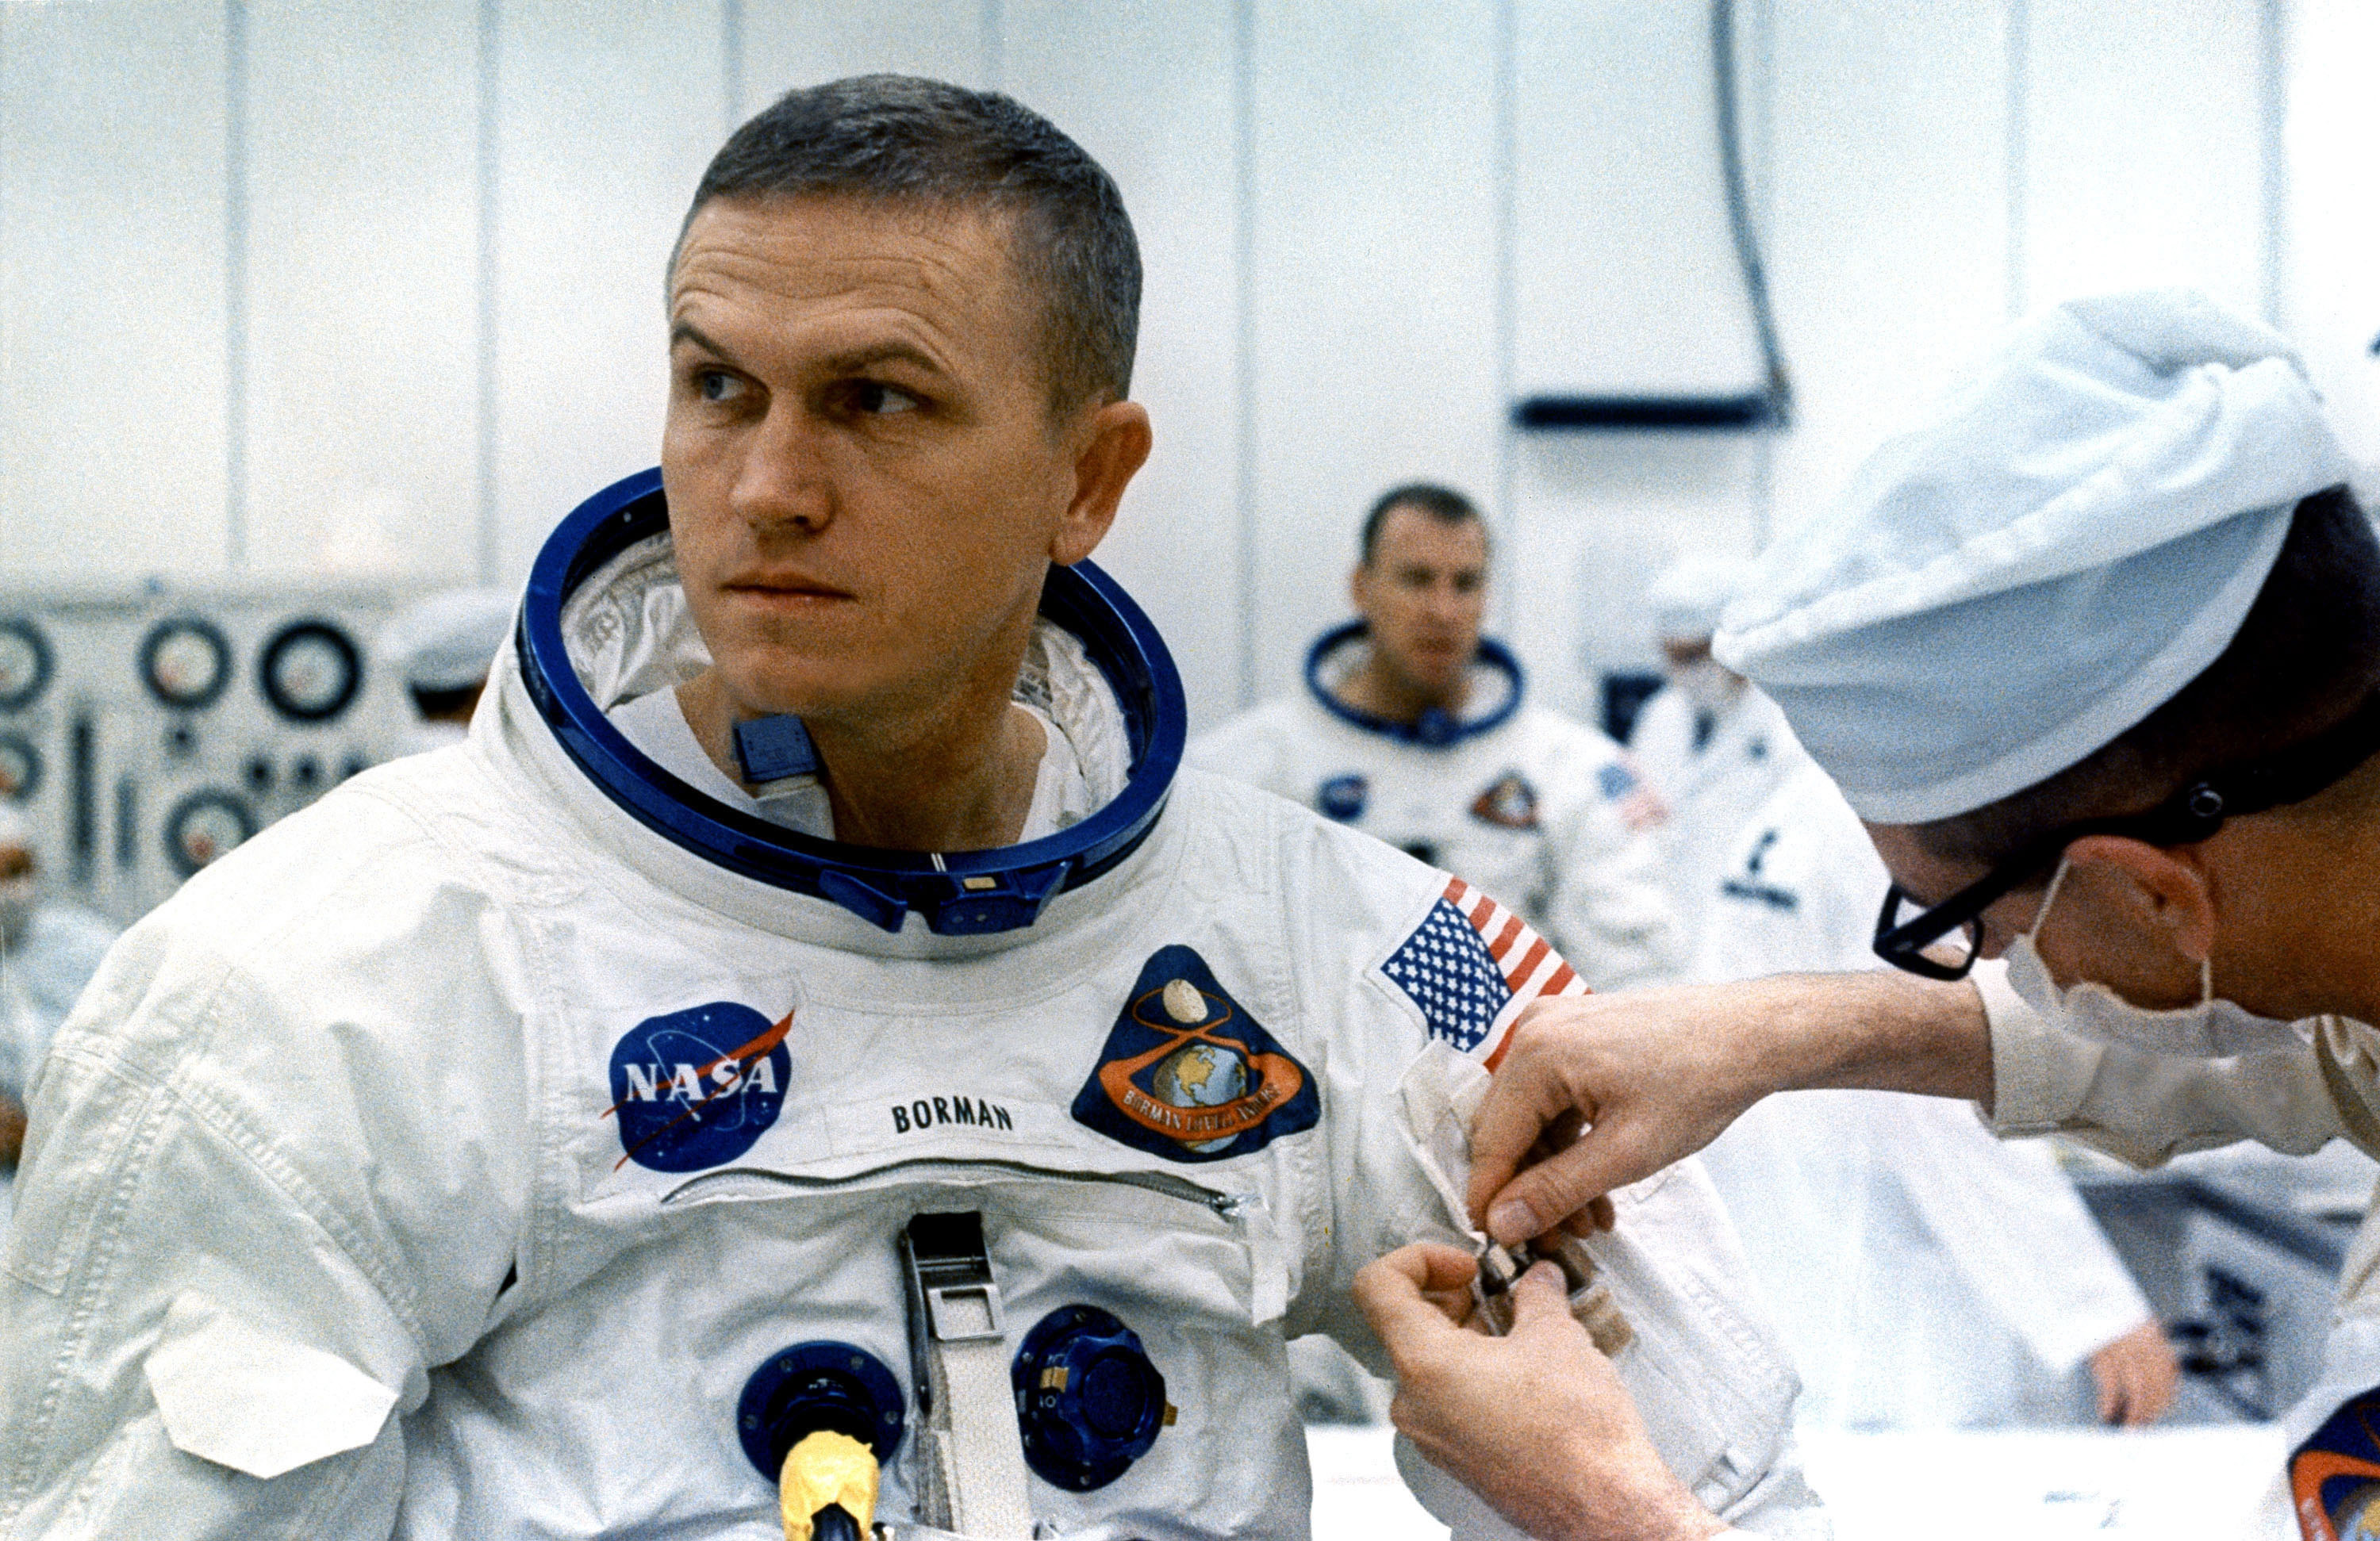 A technician places two inflight pens and a penlight in the spacesuit pocket of Apollo 8 commander Frank Borman